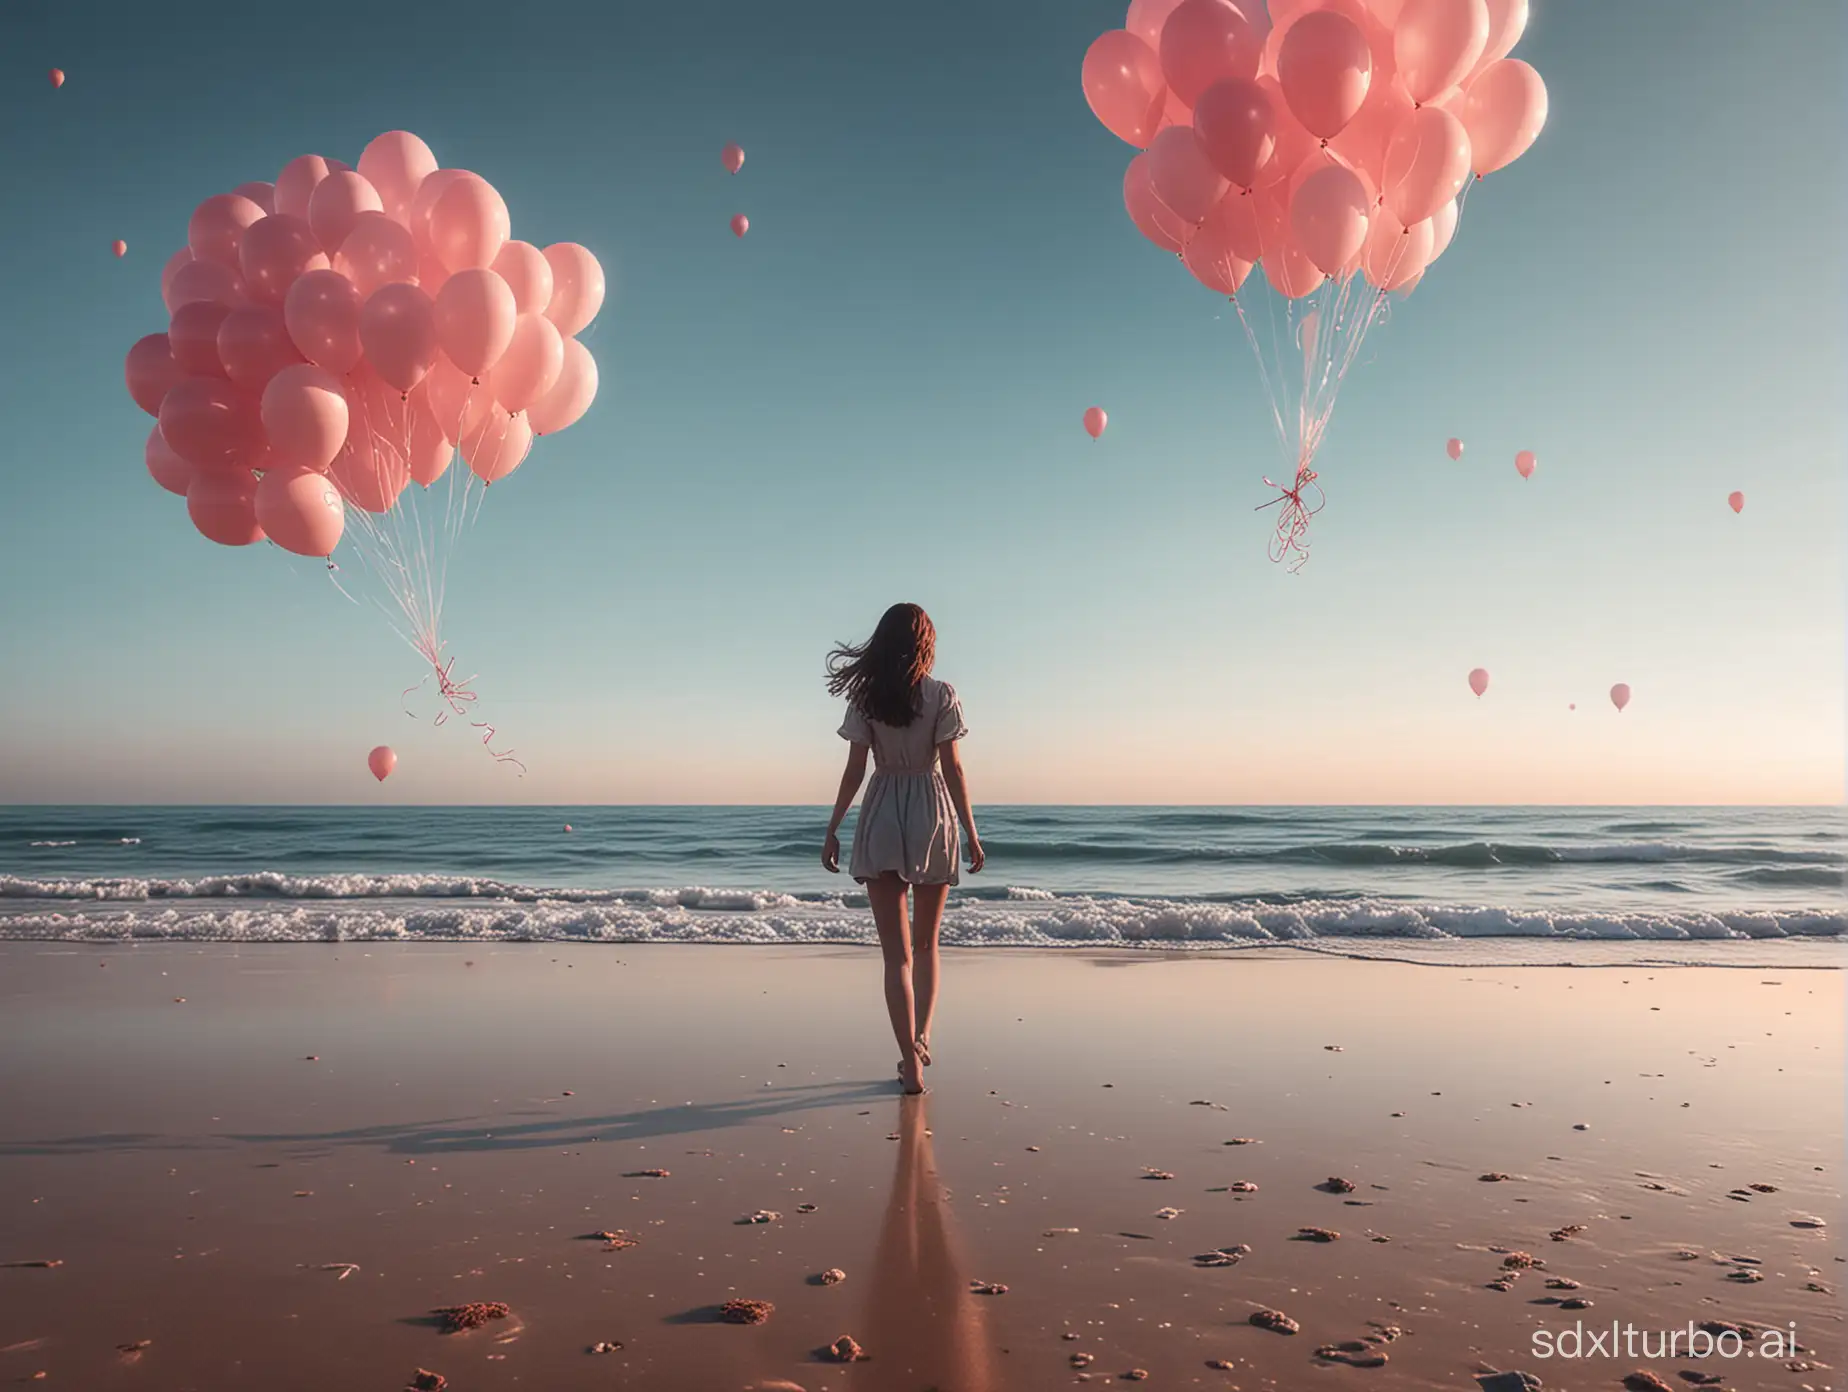 A girl is walking on the beach, balloons floating in the sky, with a sci-fi hue.